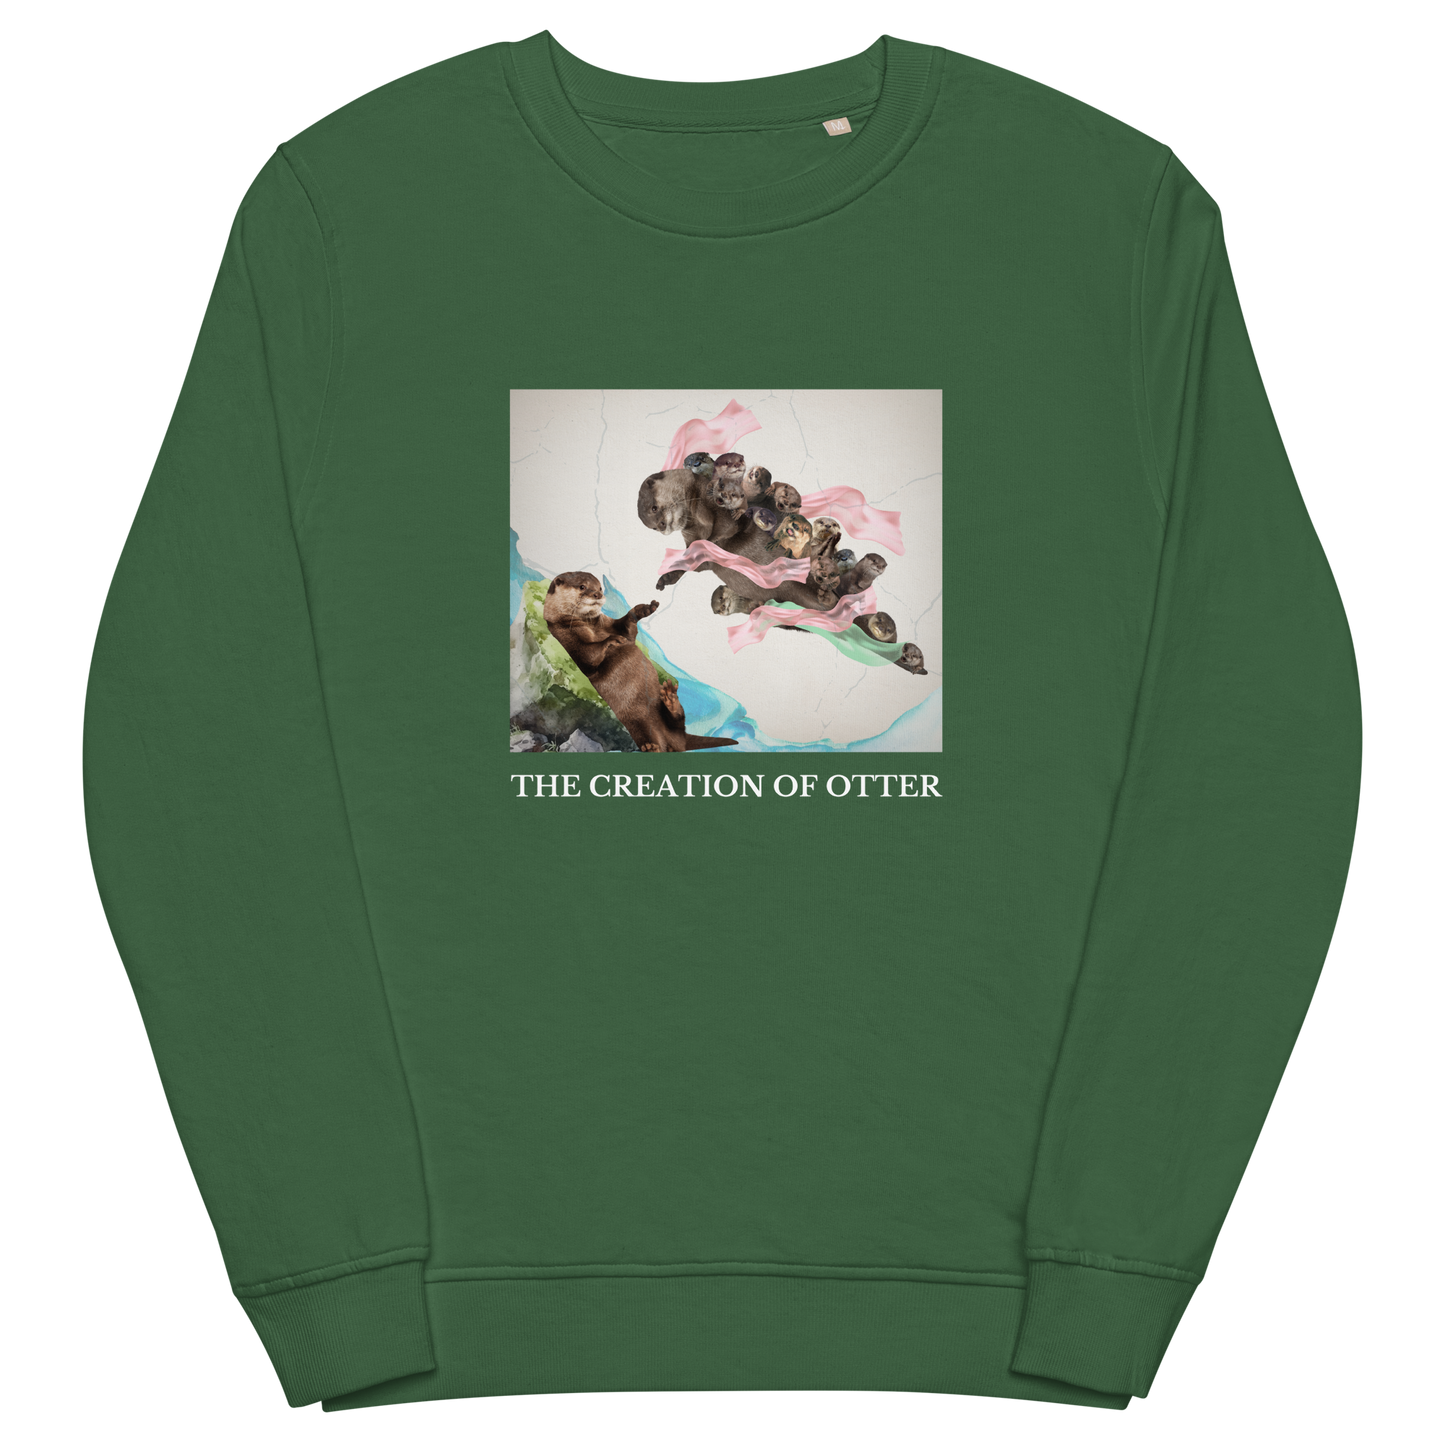 Bottle Green Organic Otter Sweatshirt featuring a playful The Creation of Otter parody of Michelangelo's masterpiece - Artsy/Funny Graphic Otter Sweatshirts - Boozy Fox